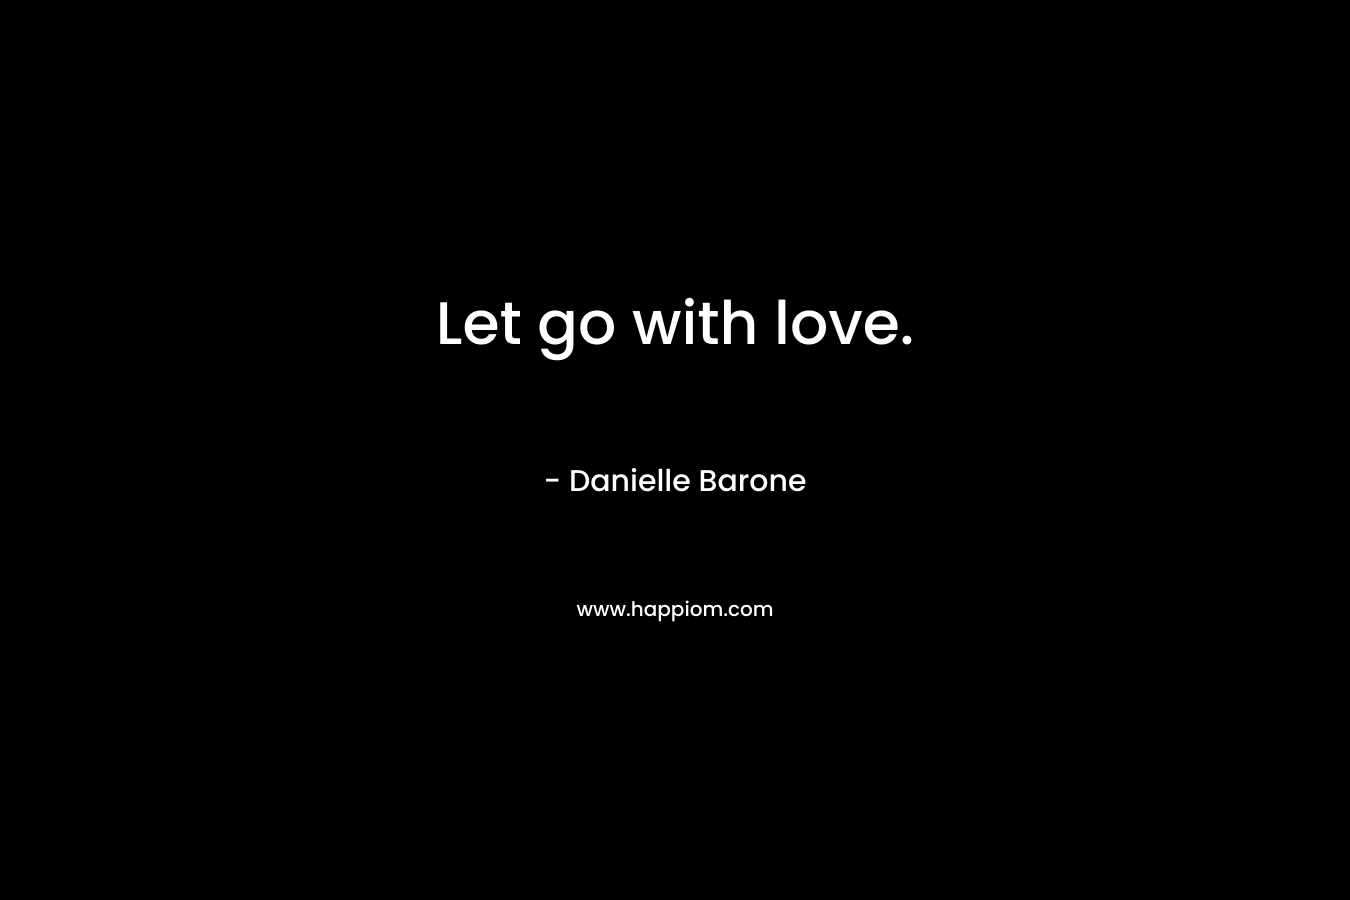 Let go with love. – Danielle Barone